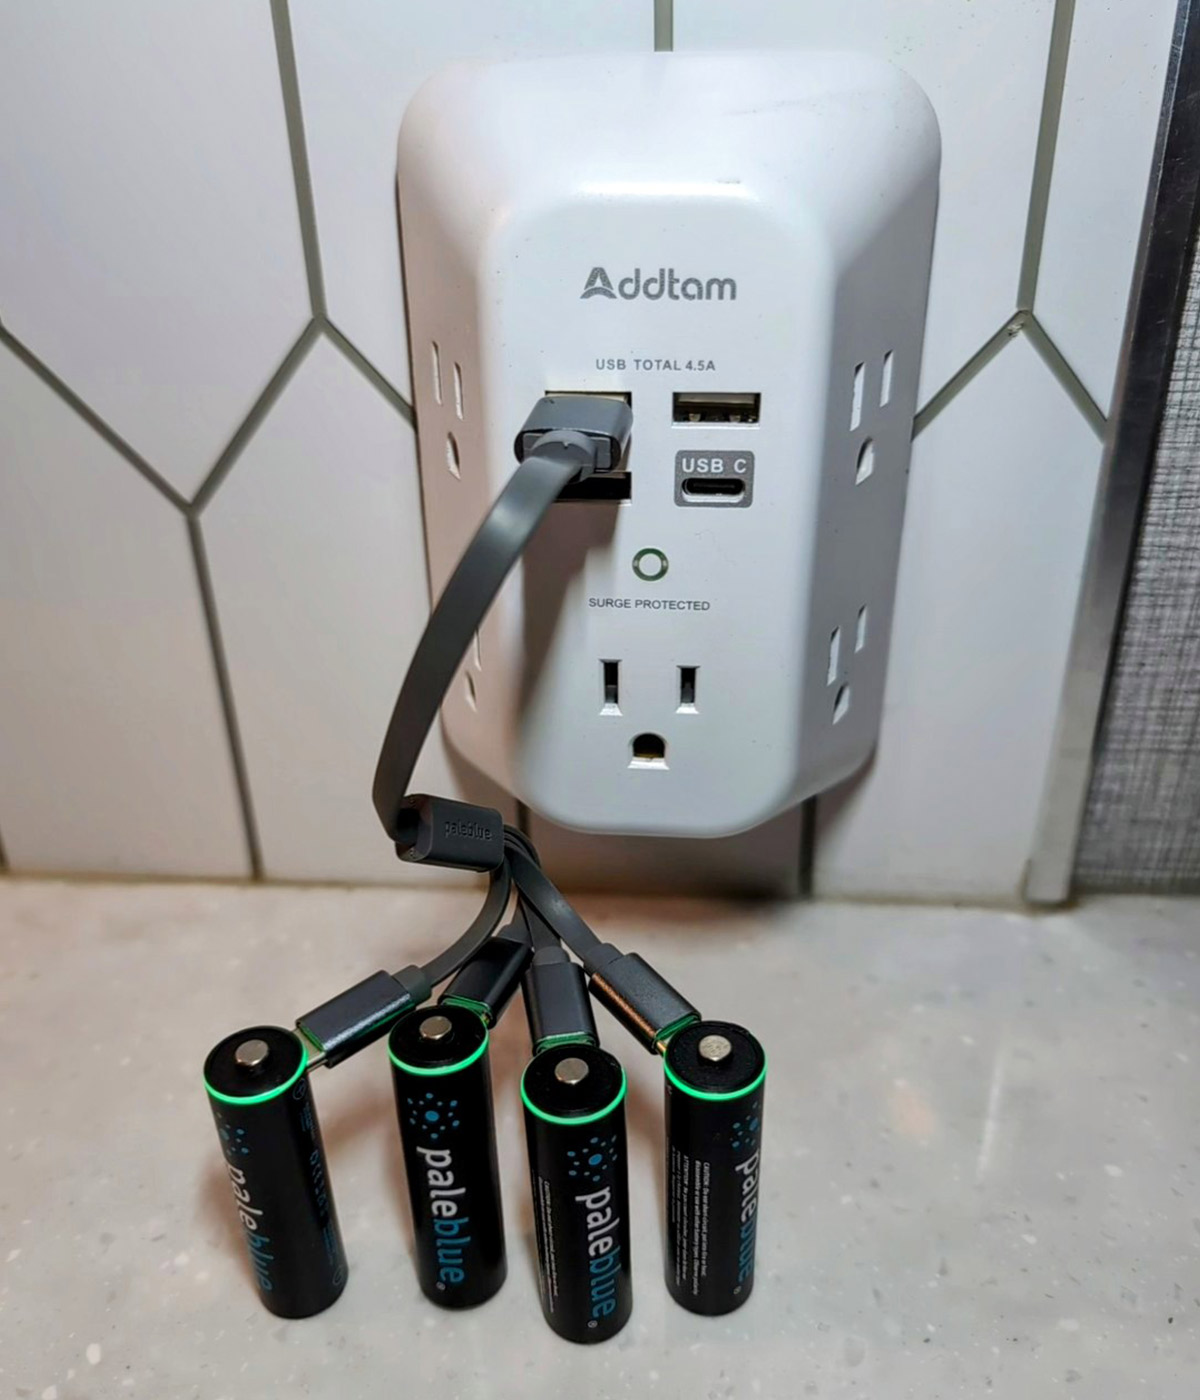 close view of four double A batteries being charged connected to an Addtam walll charger